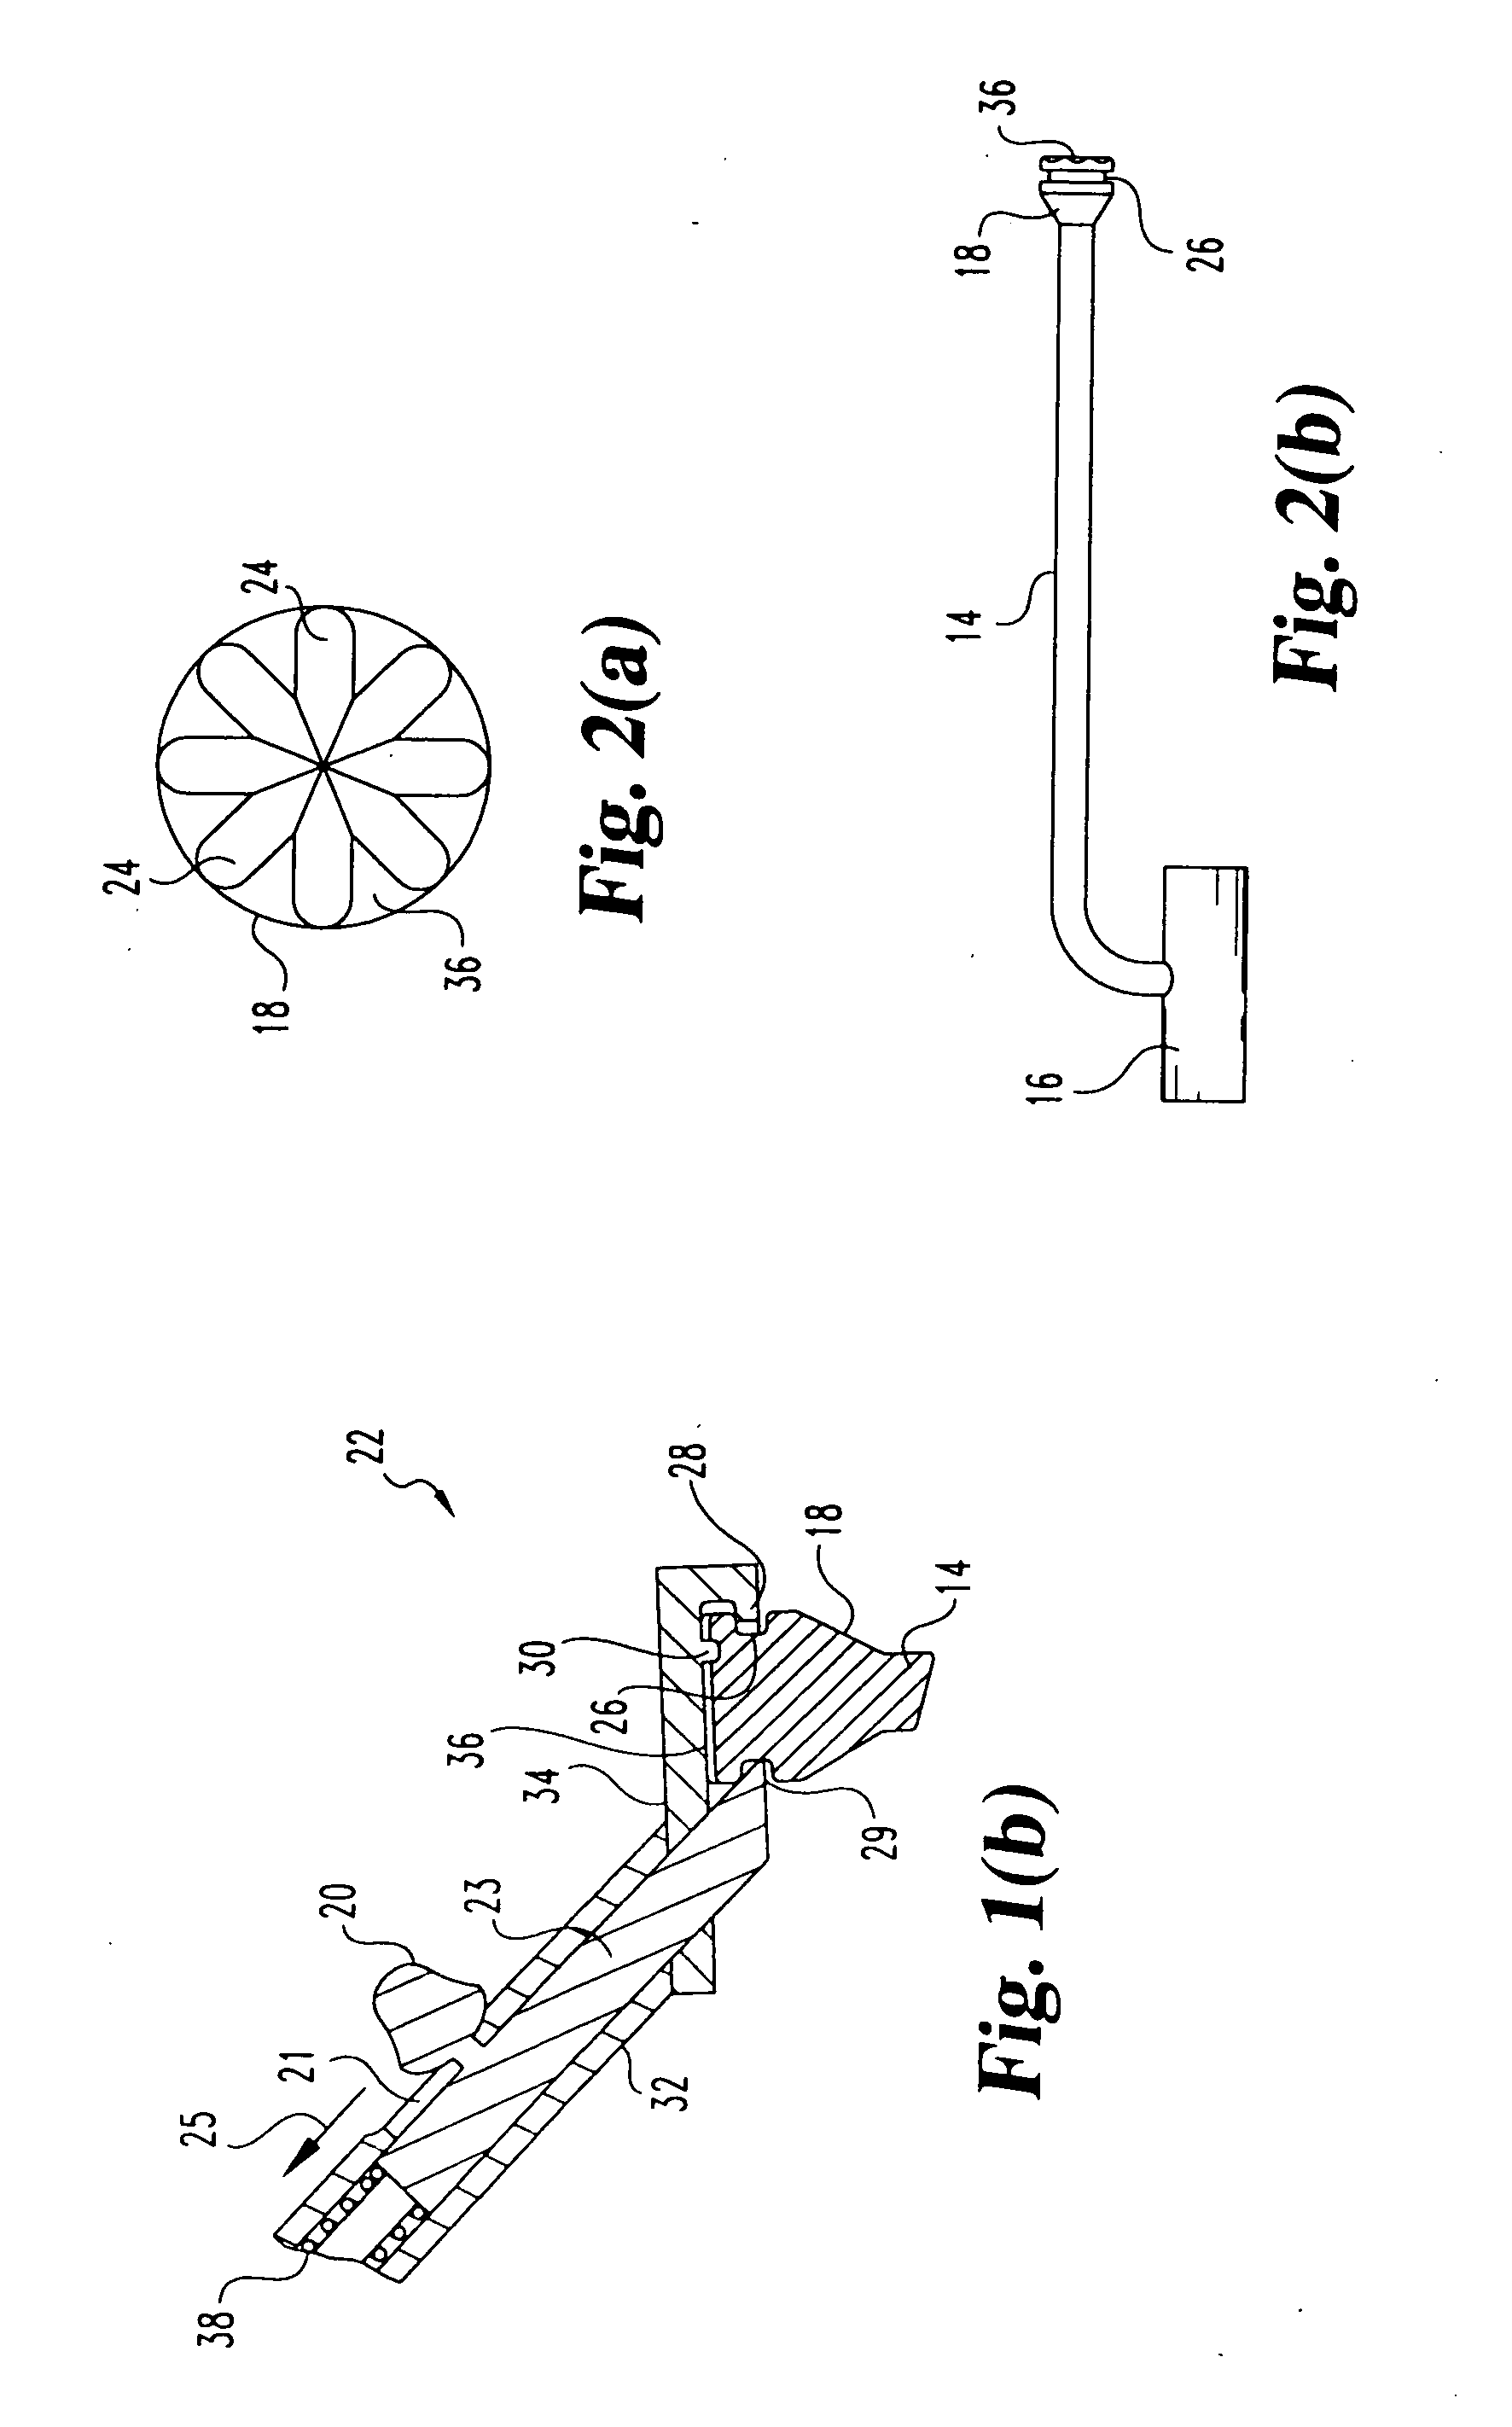 Method and instrumentation for posterior interbody fusion